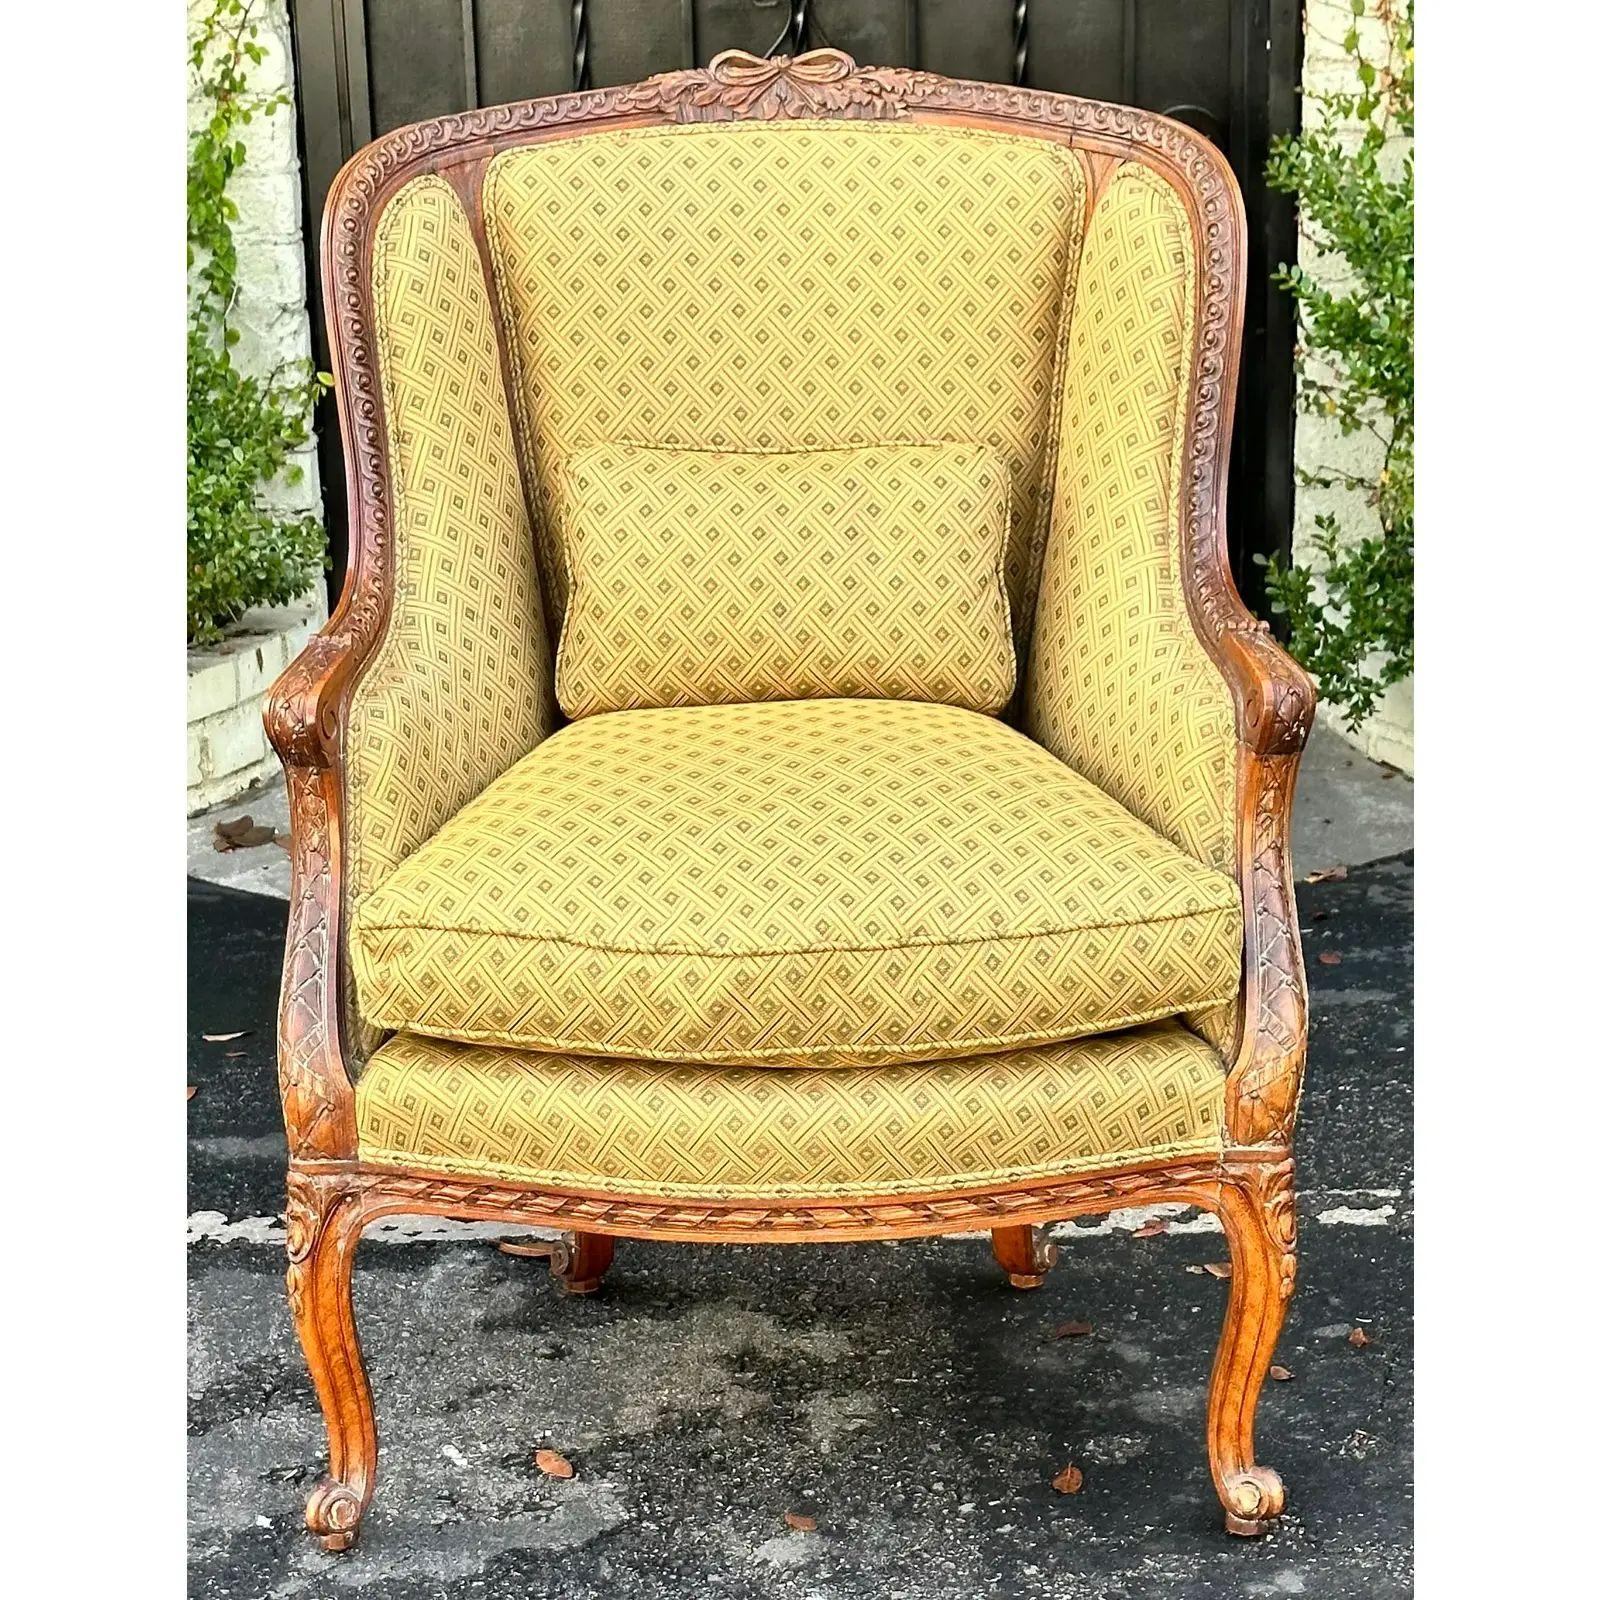 Antique 19th century French fruitwood bergere armchair. It is of superb quality and features down filled cushions and exquisitely carved details.

Additional information: 
Materials: Feather, fruitwood
Color: Olive
Period: 19th century
Number